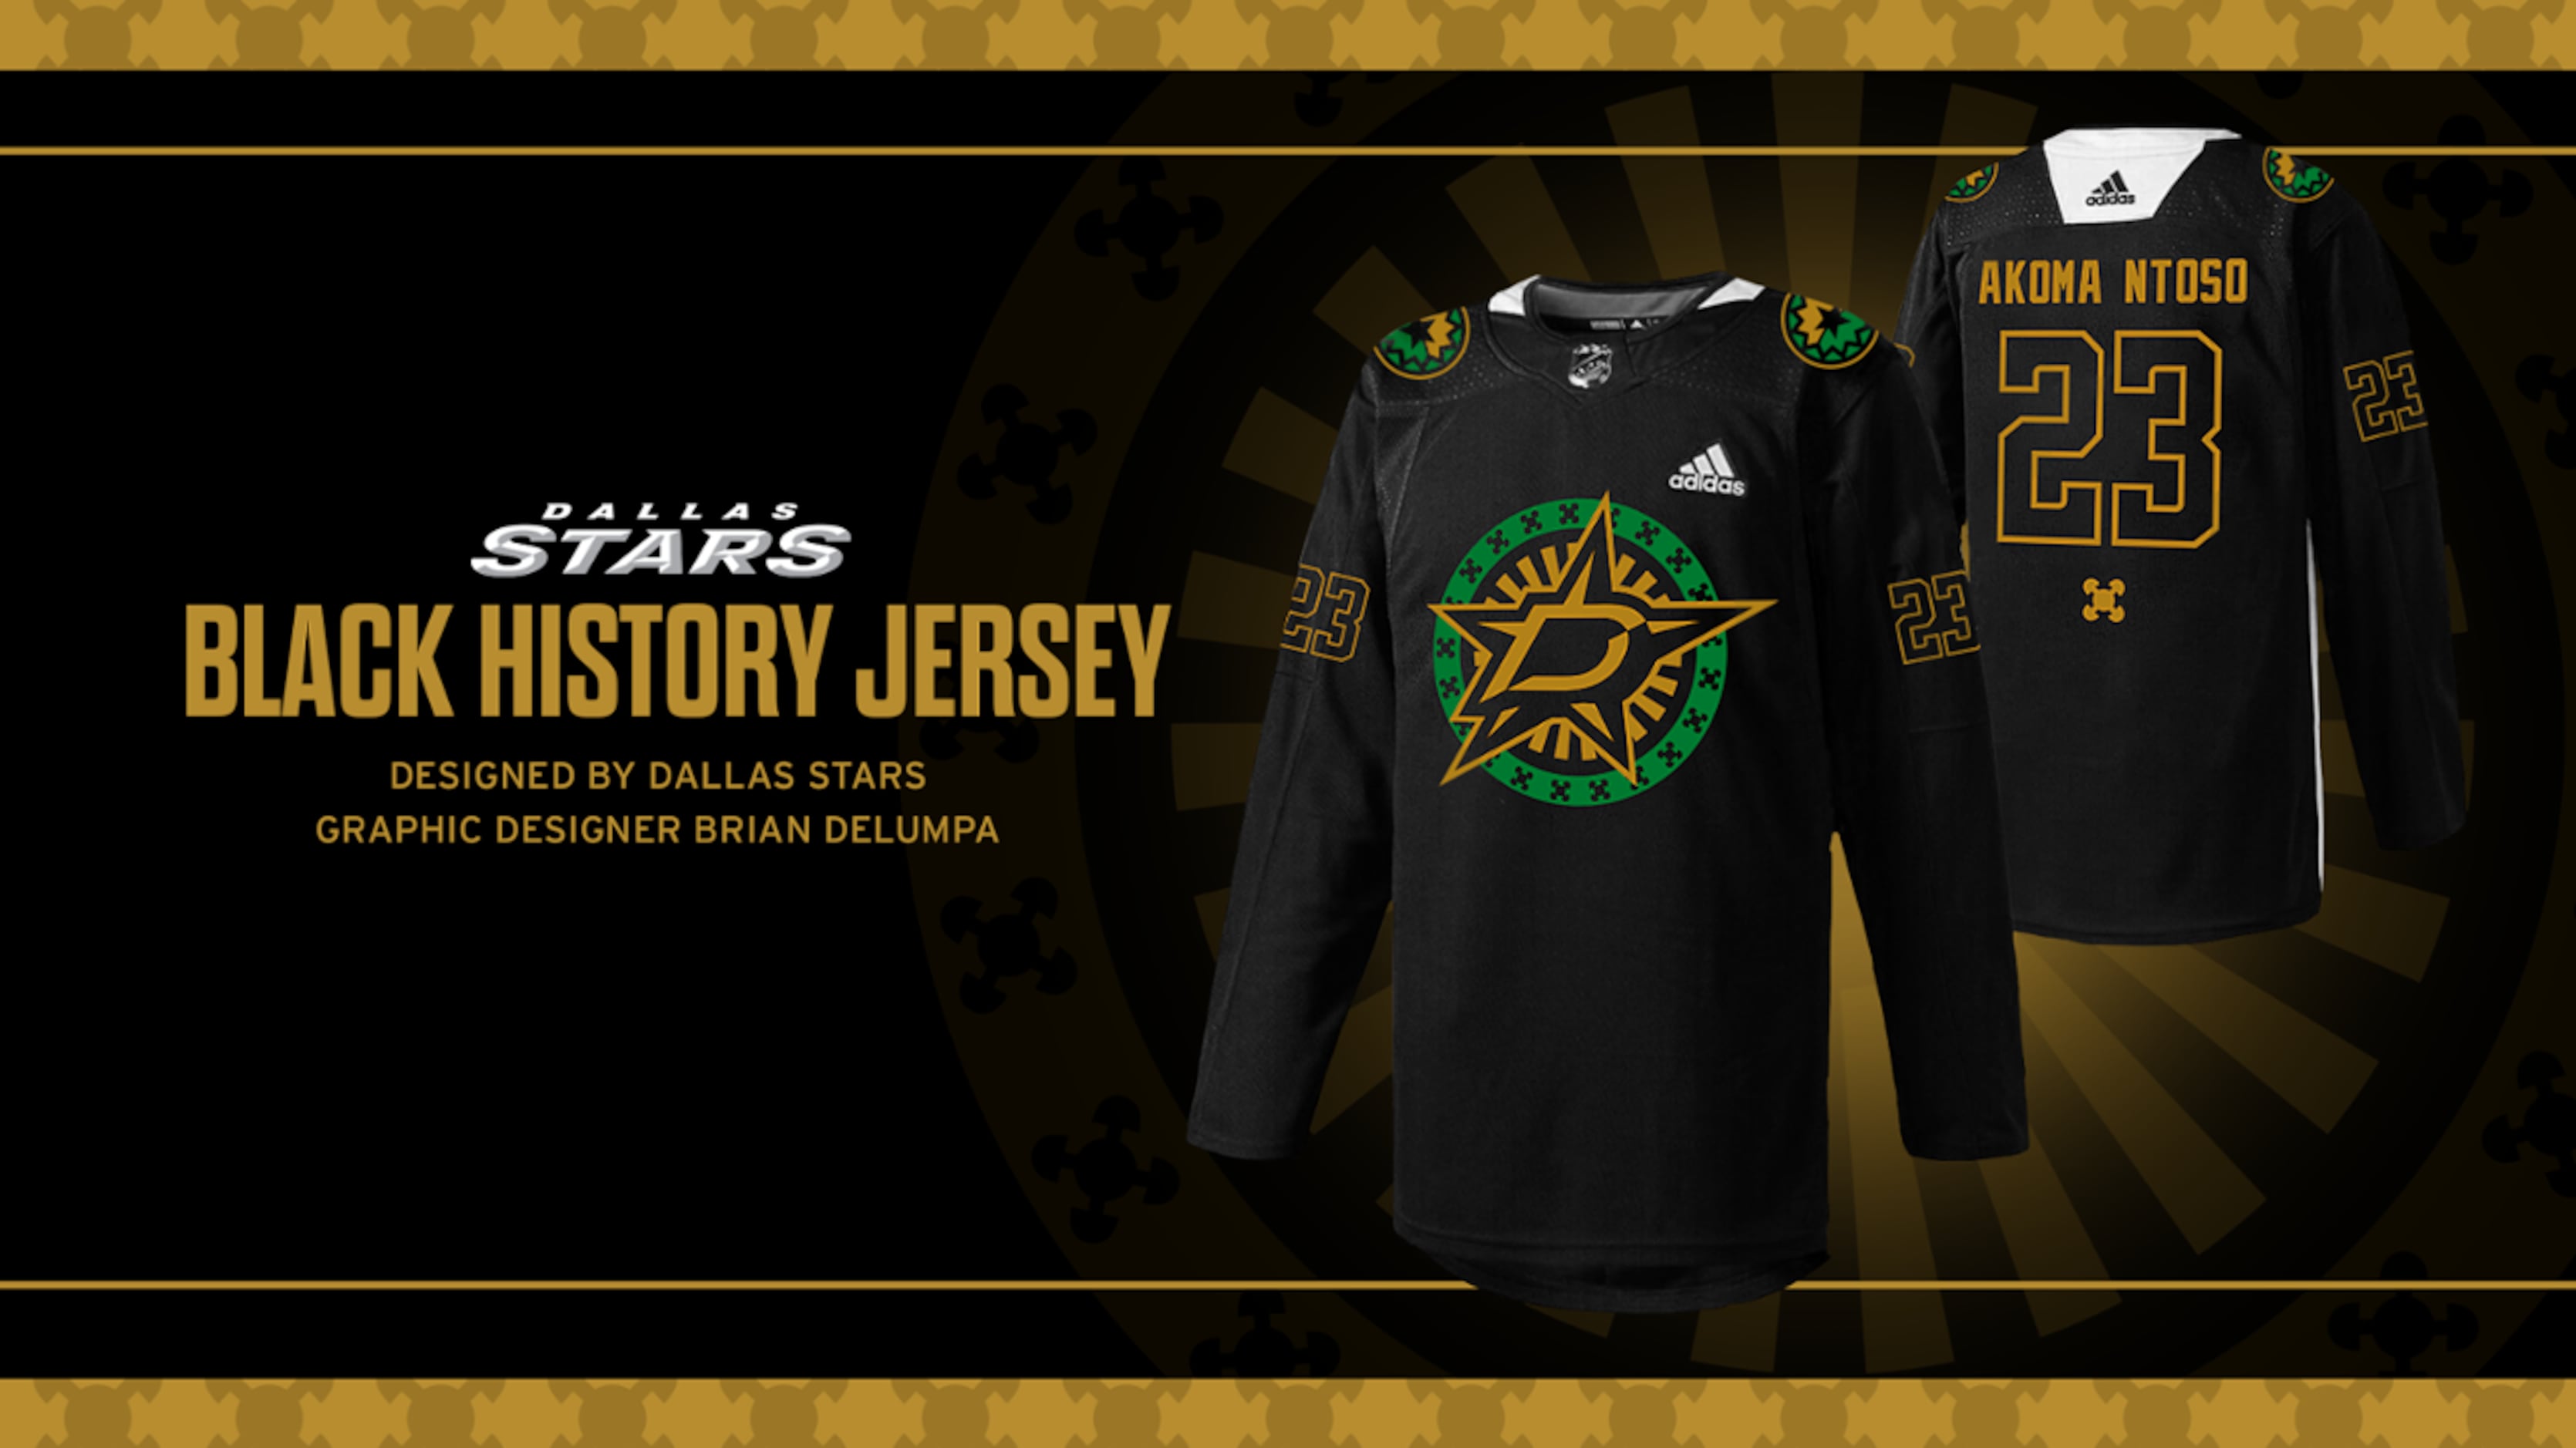 Wild go old school with North Star jerseys. Well, for warm-ups.